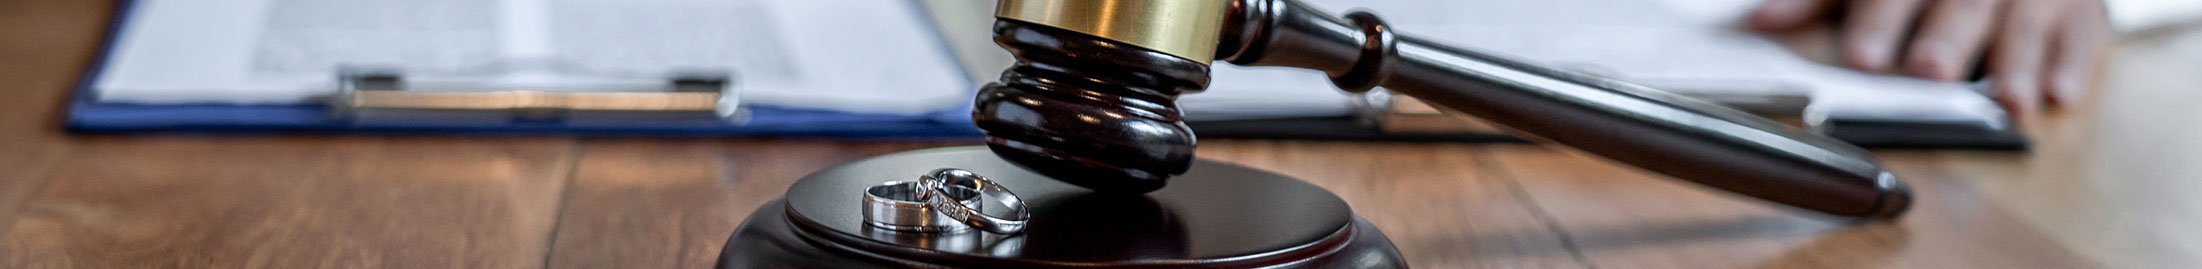 gavel with two wedding rings, showing divorce